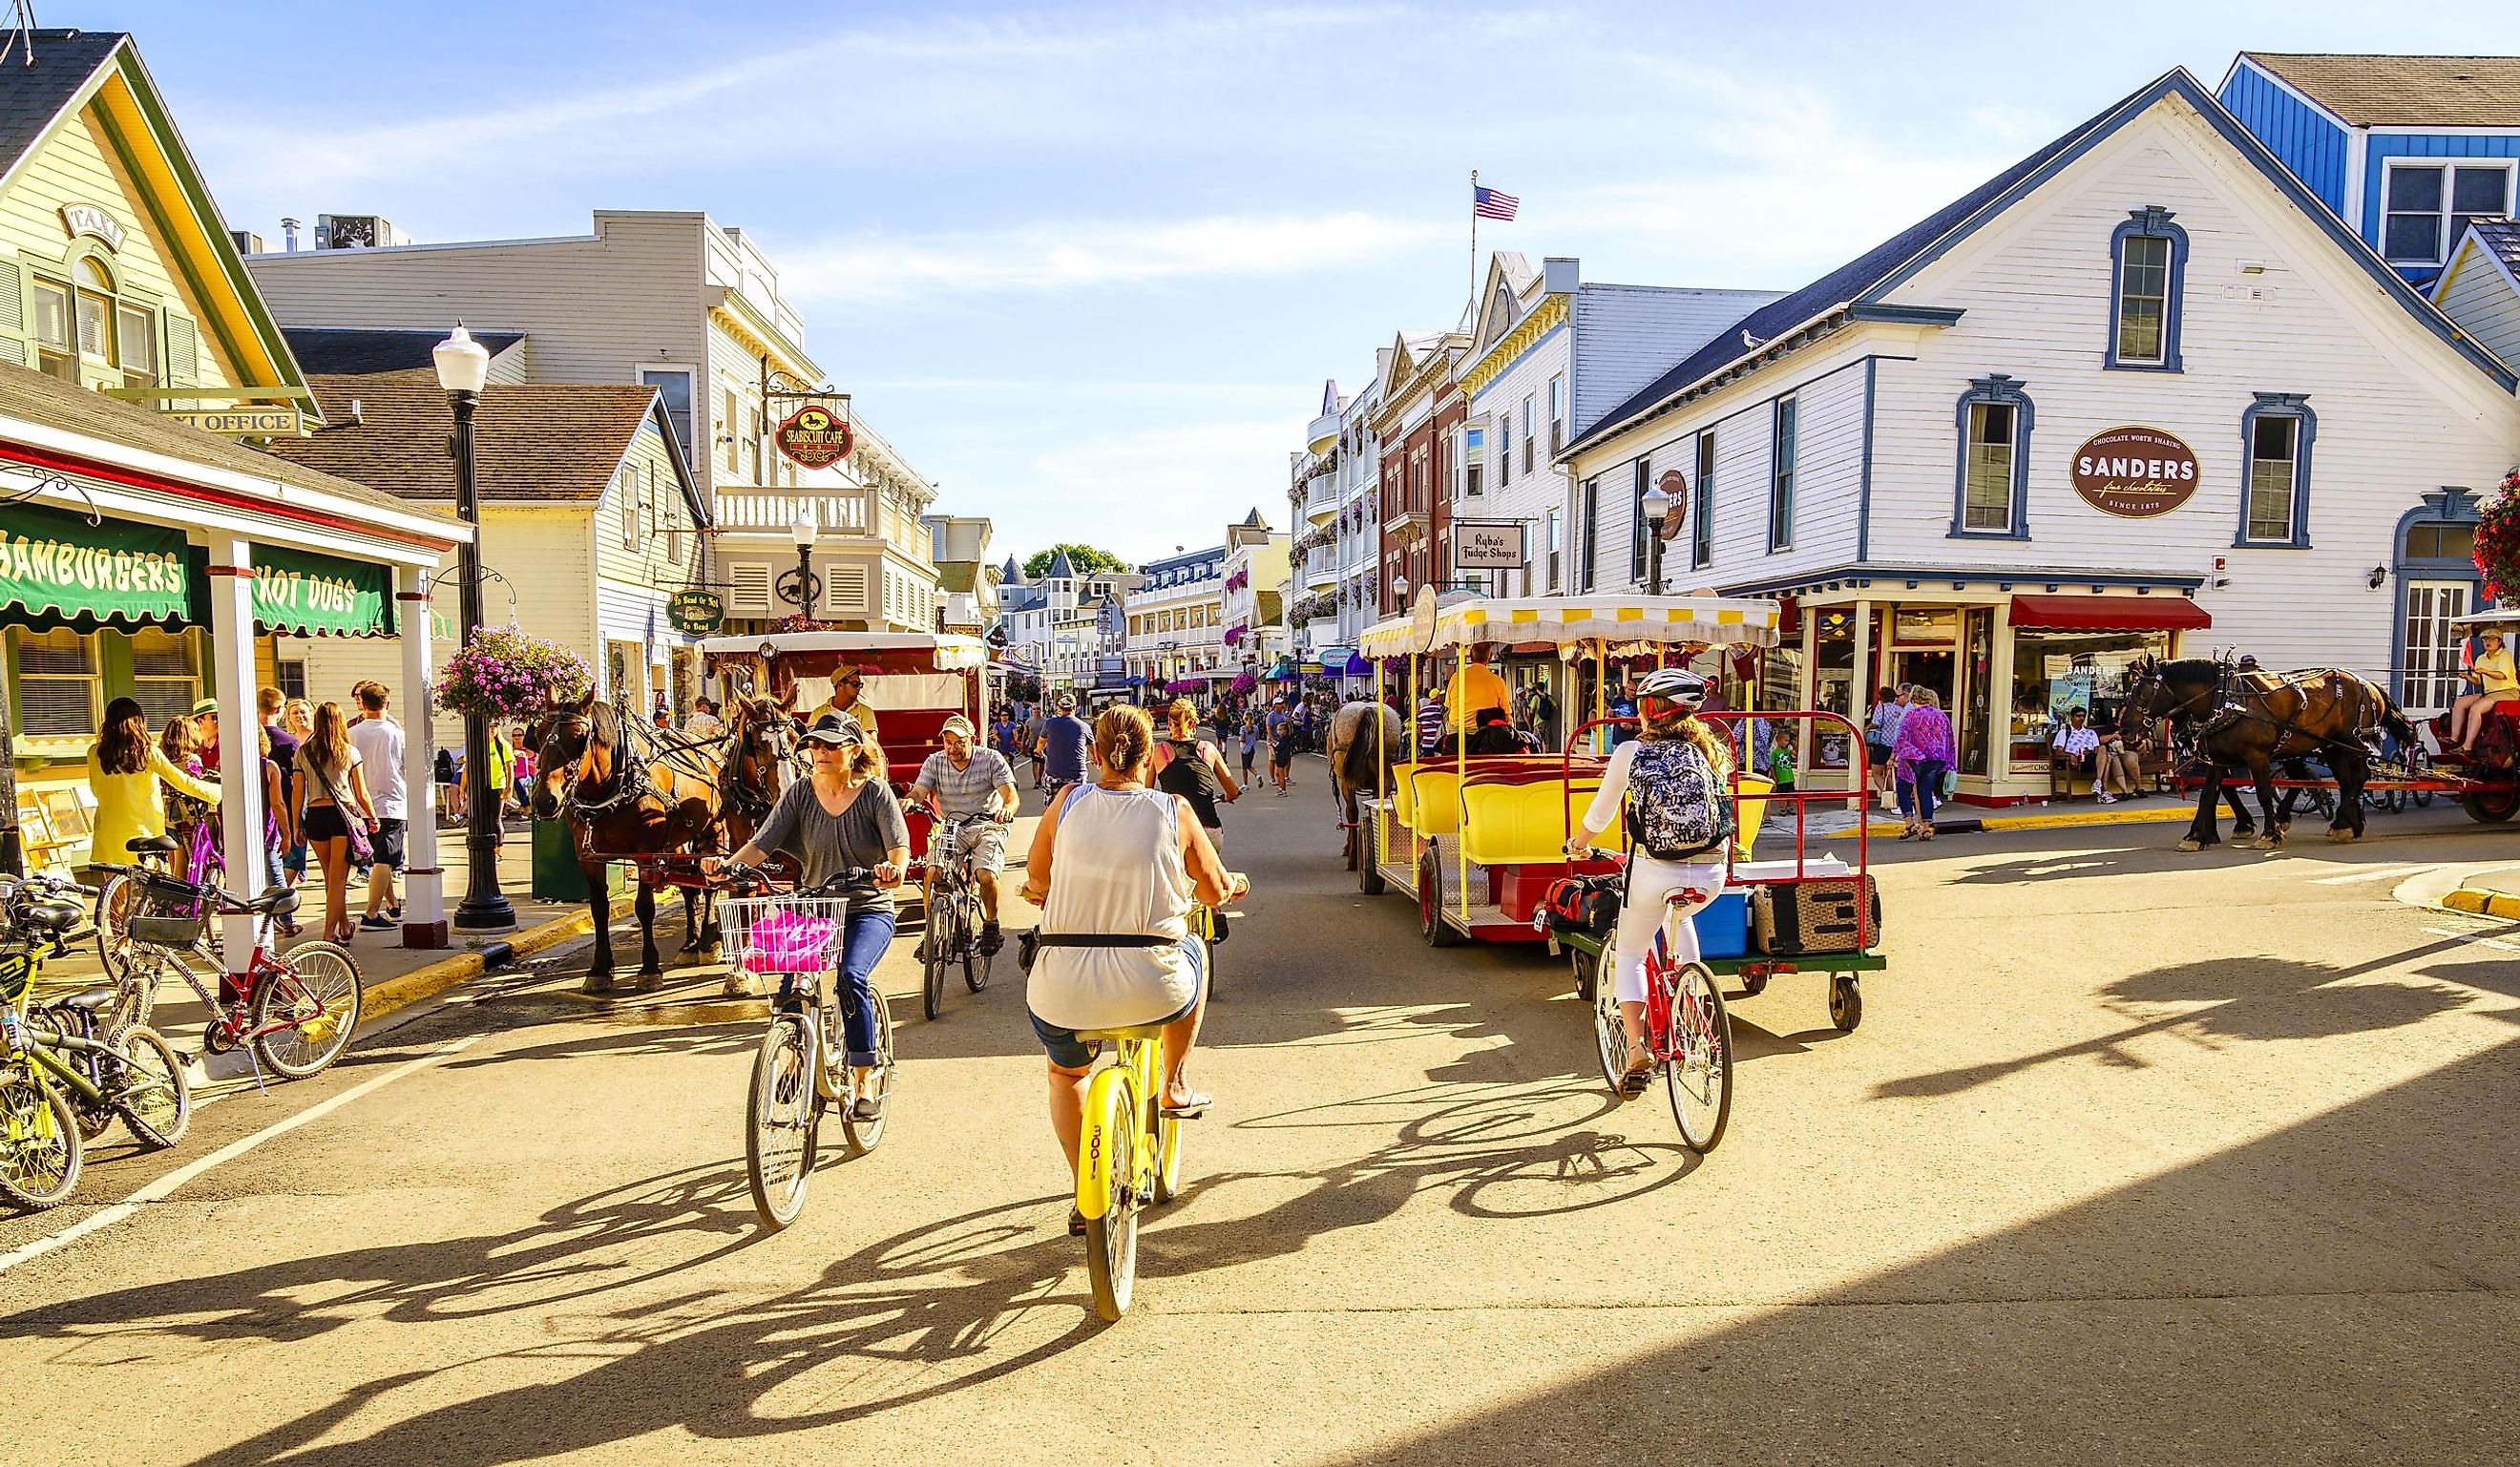 Vacationers take on Market Street on Mackinac Island that is lined with shops and restaurants. Editorial credit: Alexey Stiop / Shutterstock.com